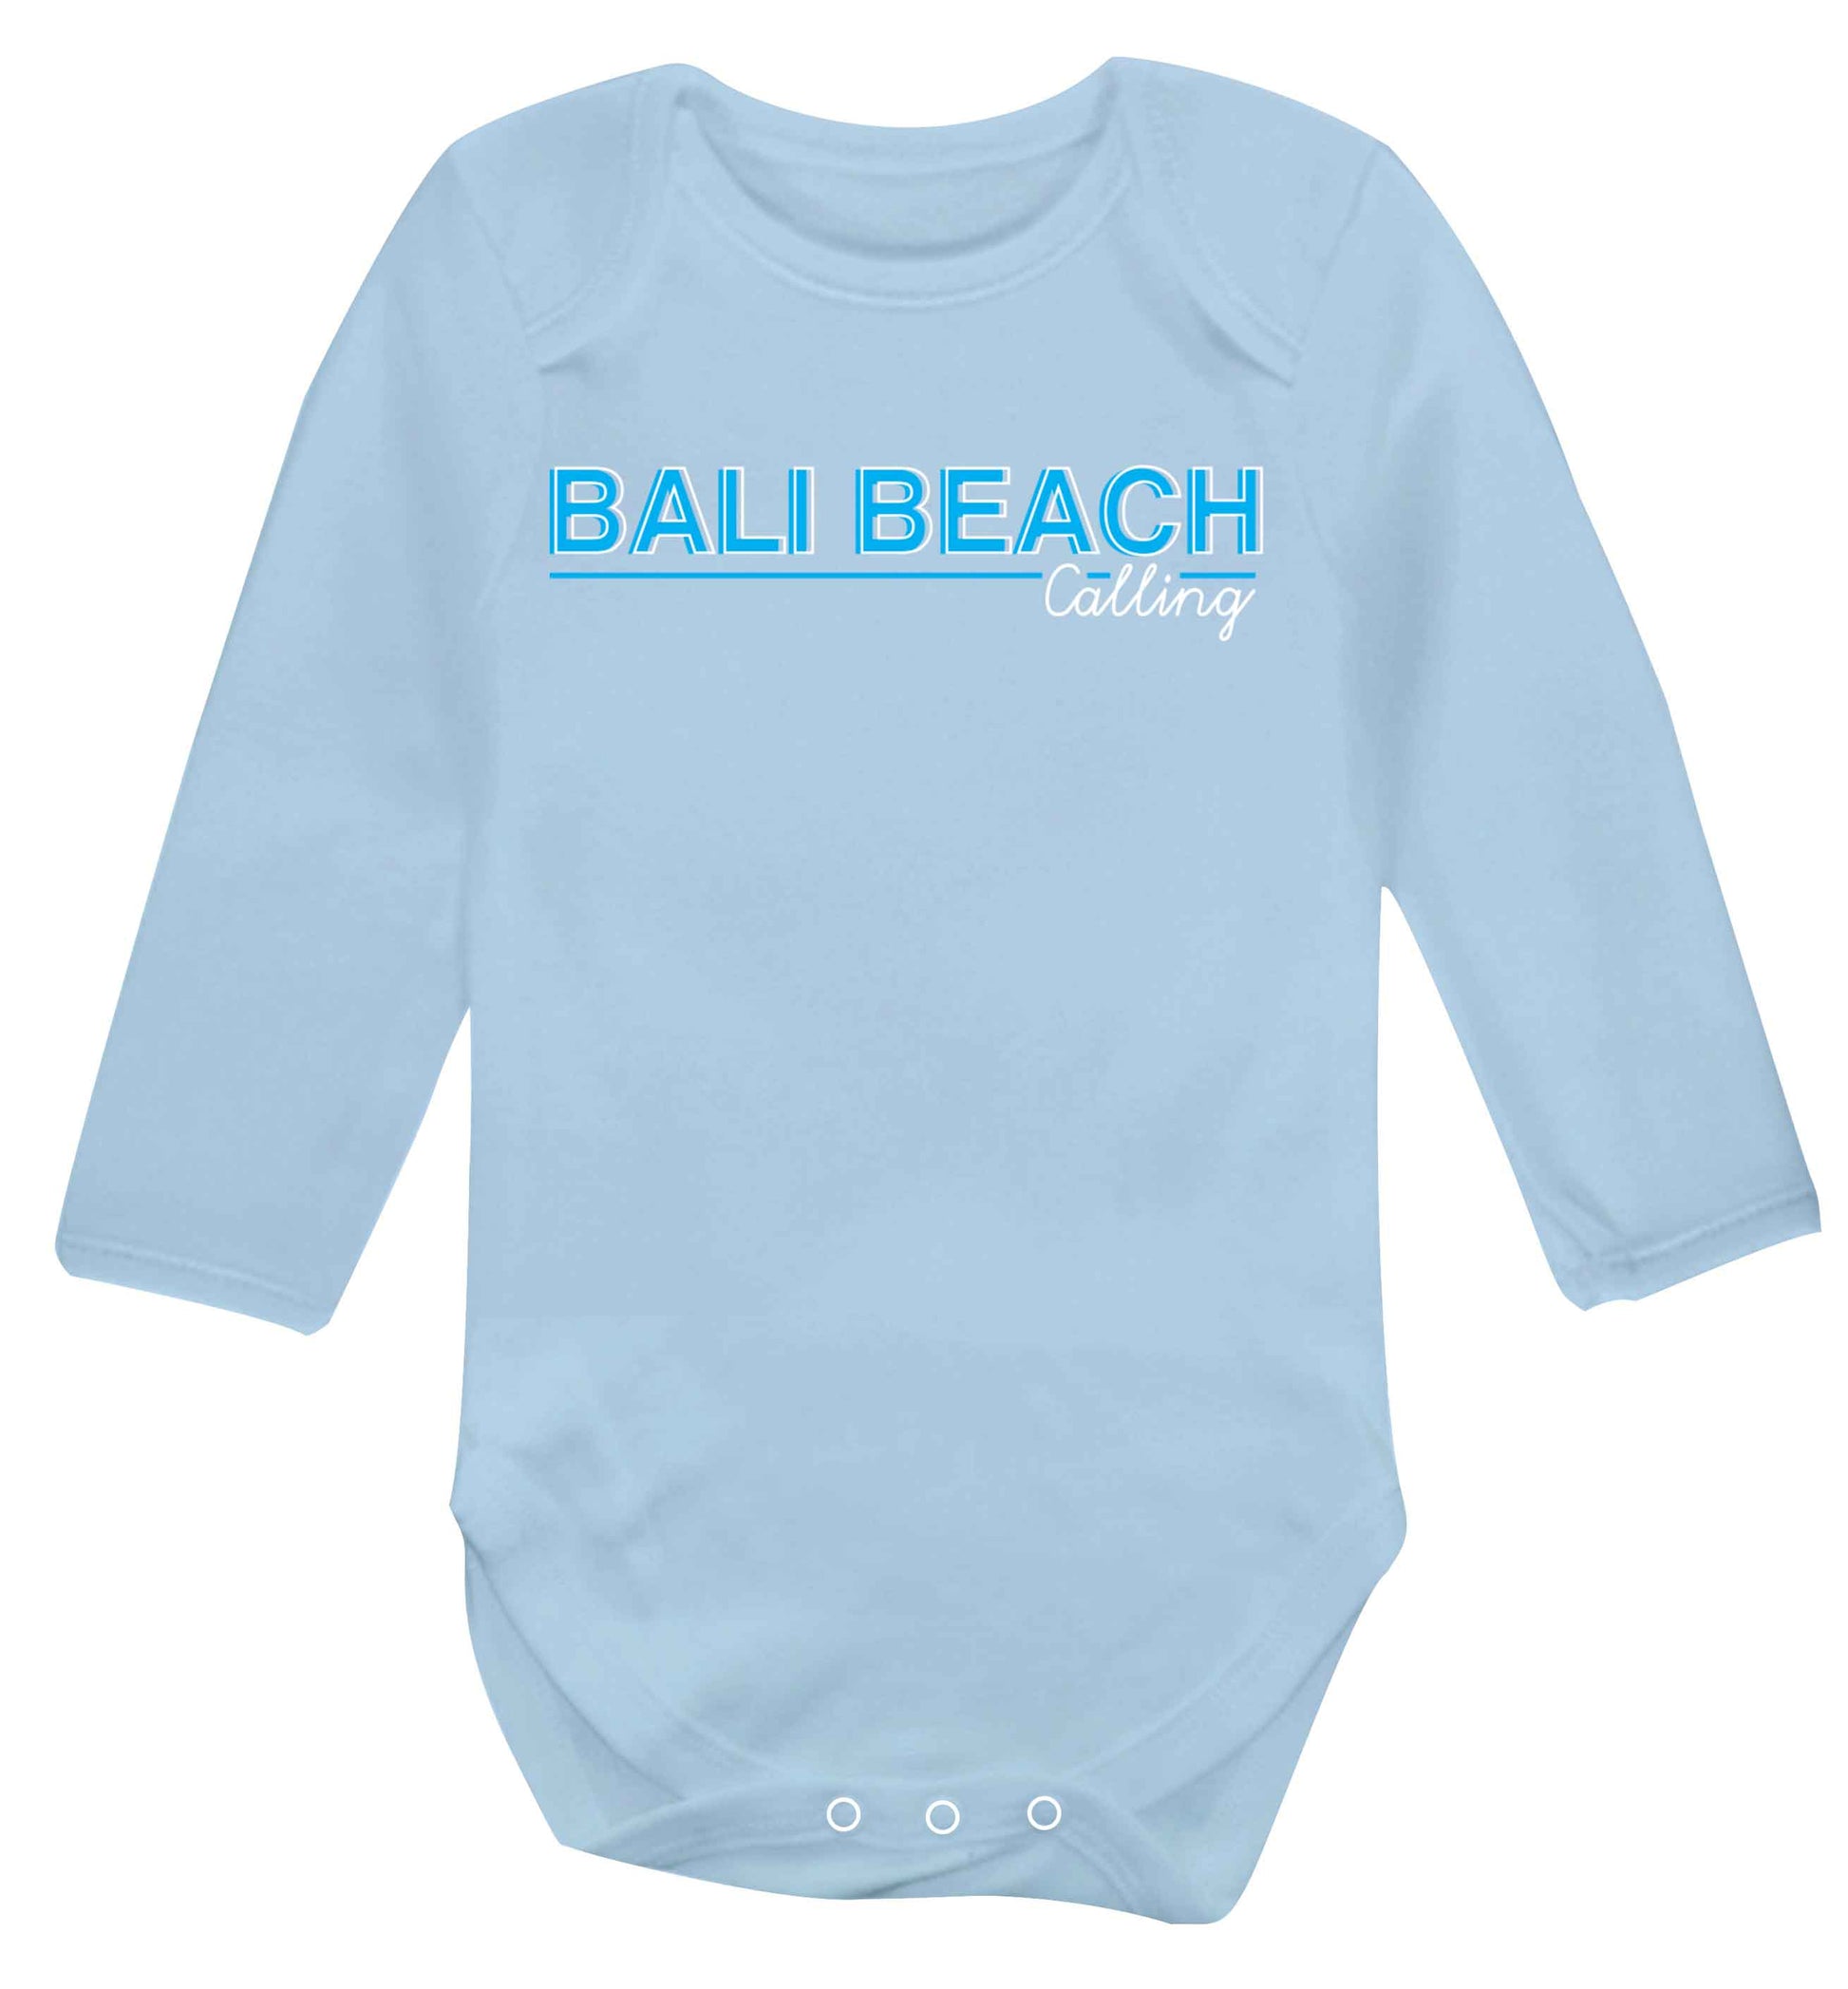 Bali beach calling Baby Vest long sleeved pale blue 6-12 months